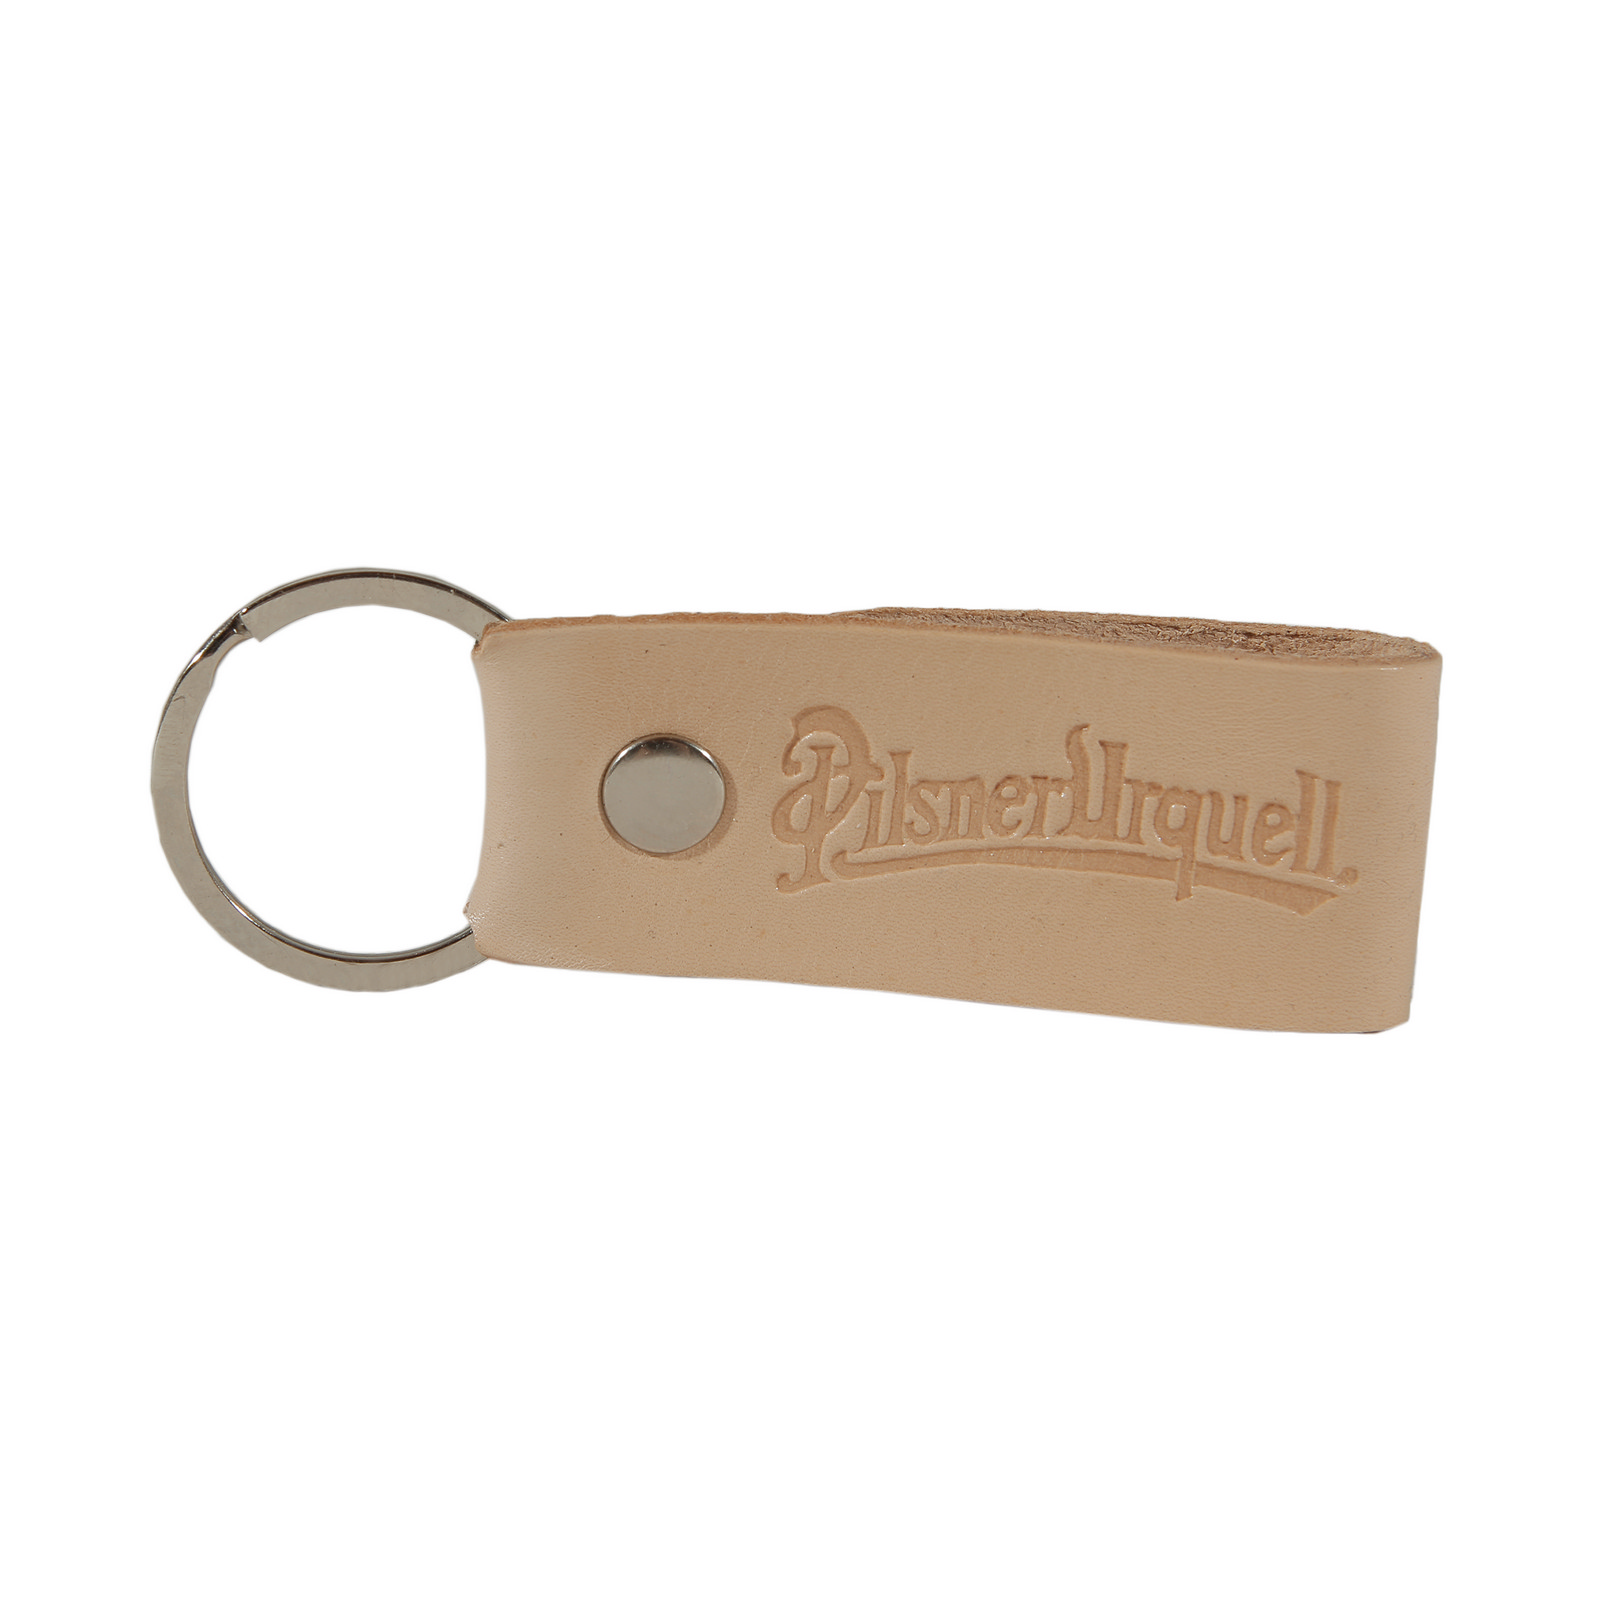 Leather Pilsner Urquell key chain